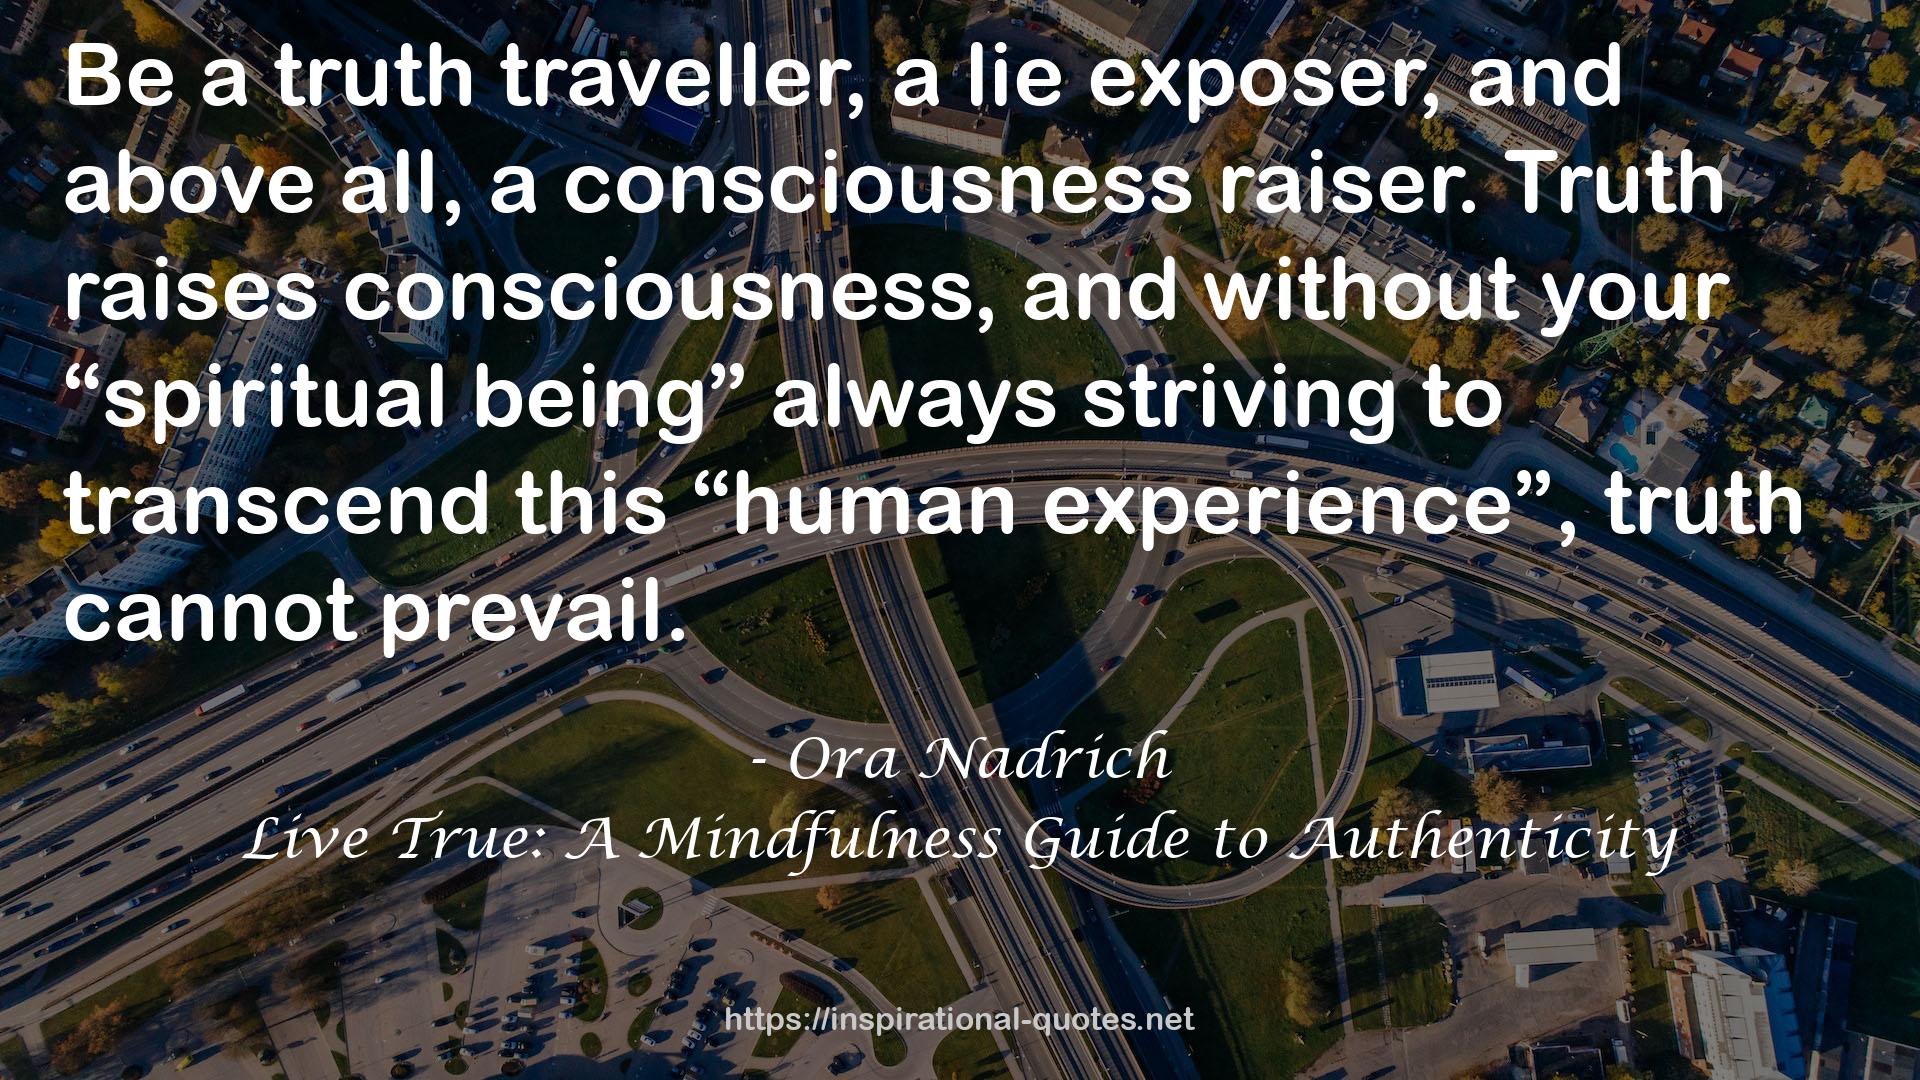 Live True: A Mindfulness Guide to Authenticity QUOTES